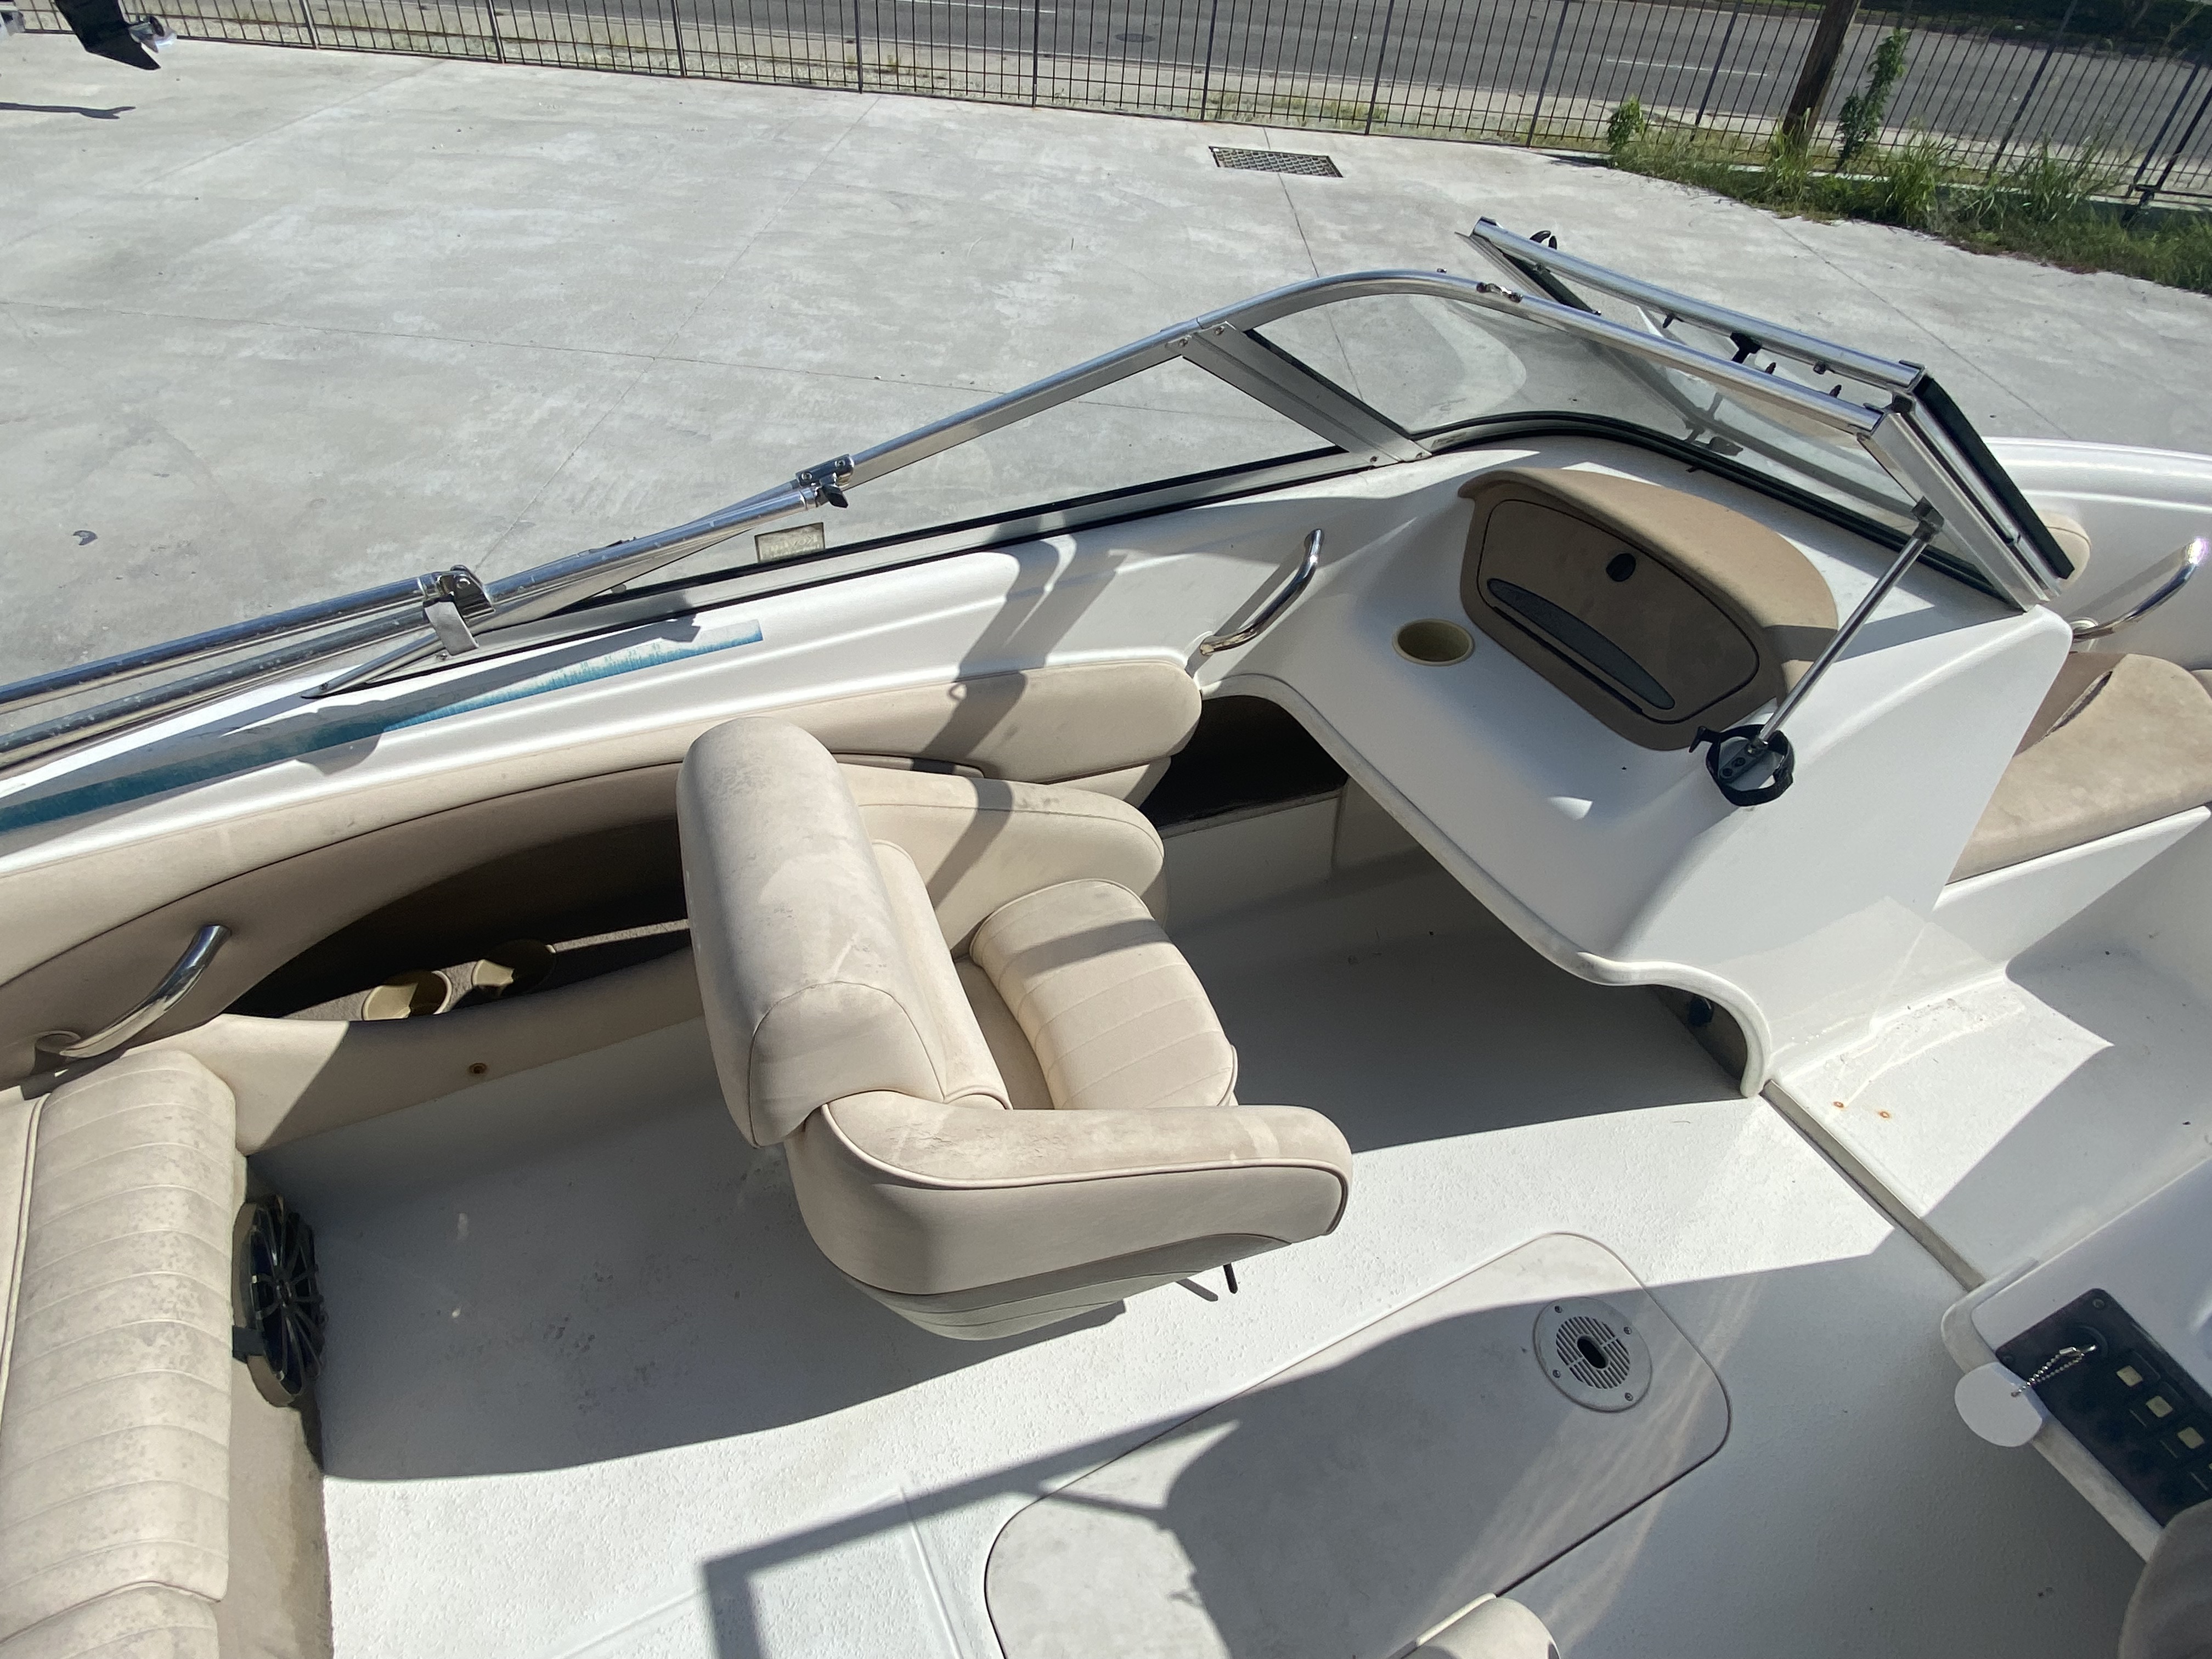 2008 Chaparral boat for sale, model of the boat is 180 SSi & Image # 7 of 10